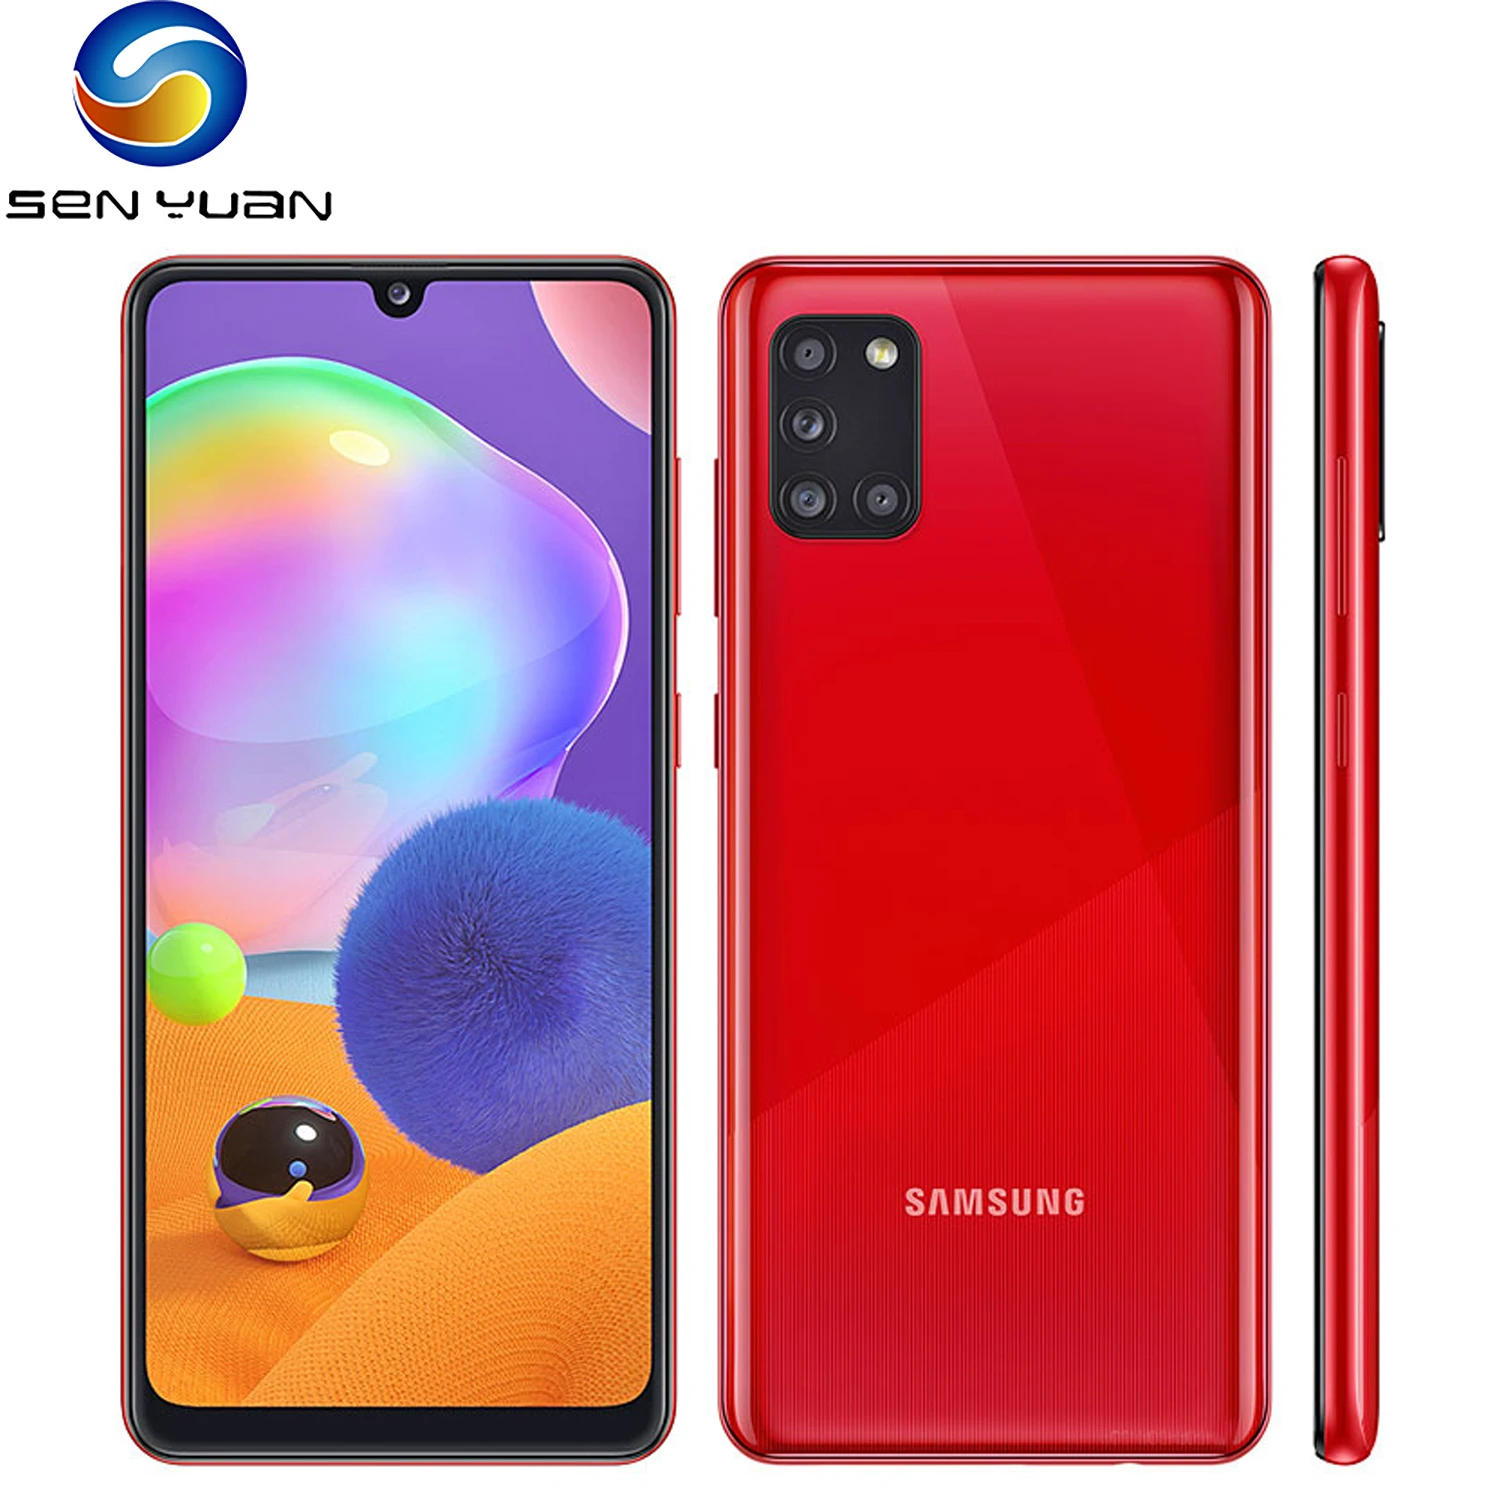 Original Samsung Galaxy A31 A315G/DS Cell Phone Dual SIM Global Version 6.4" 6GB+128GB 48MP 4G Mobile Phone Android Smartphone iphone 8 refurbished